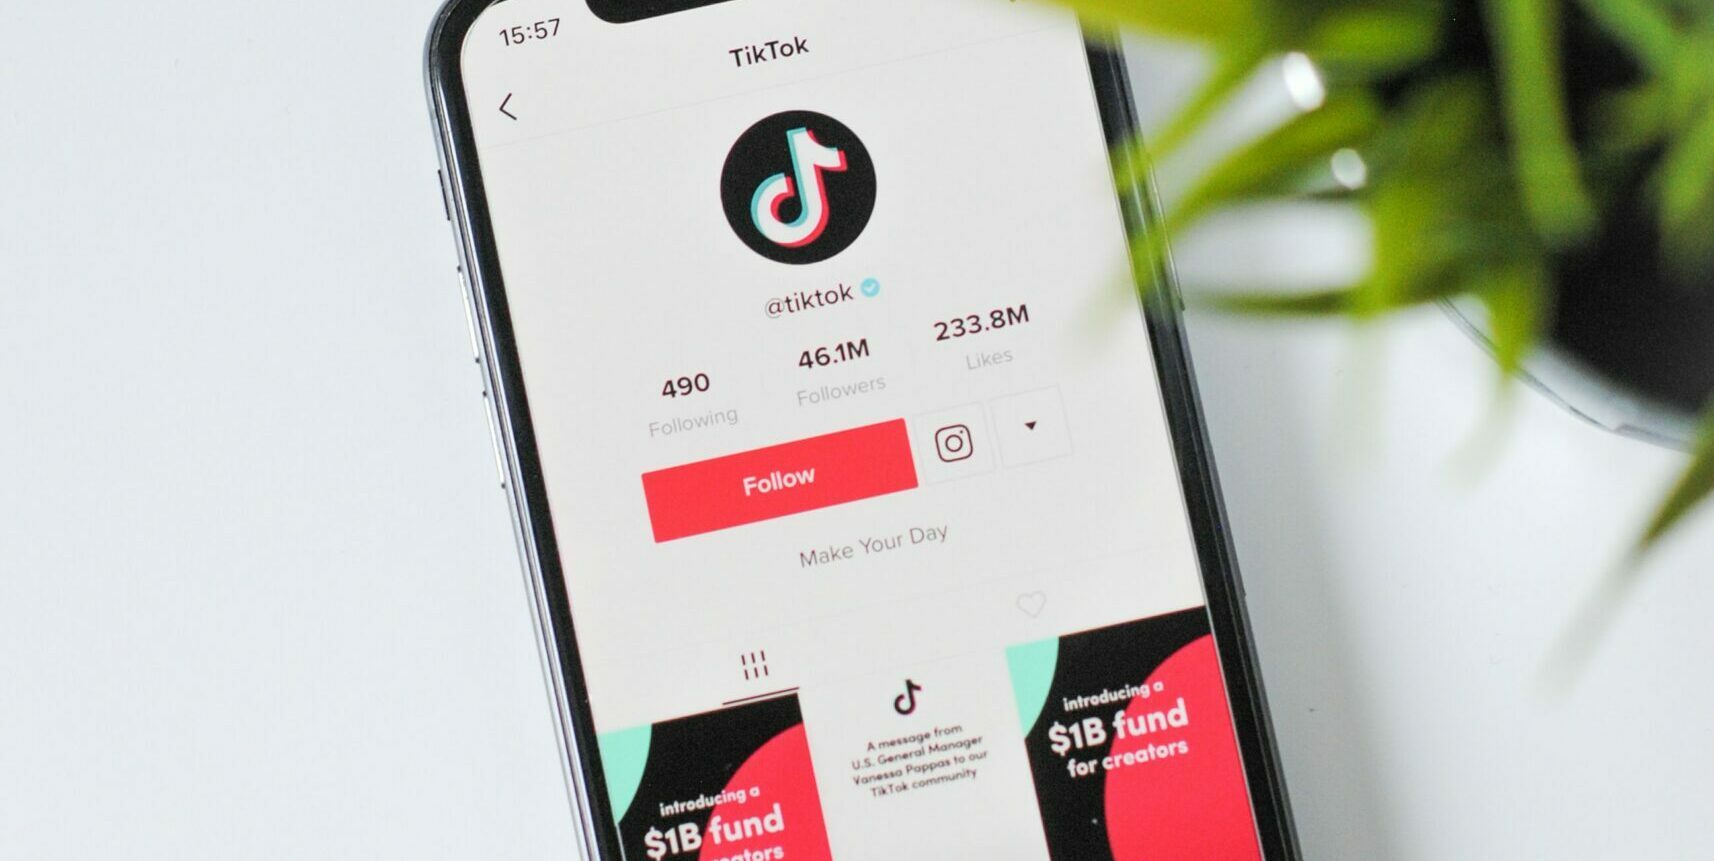 How to Become TikTok Famous: Practical Tips That Work